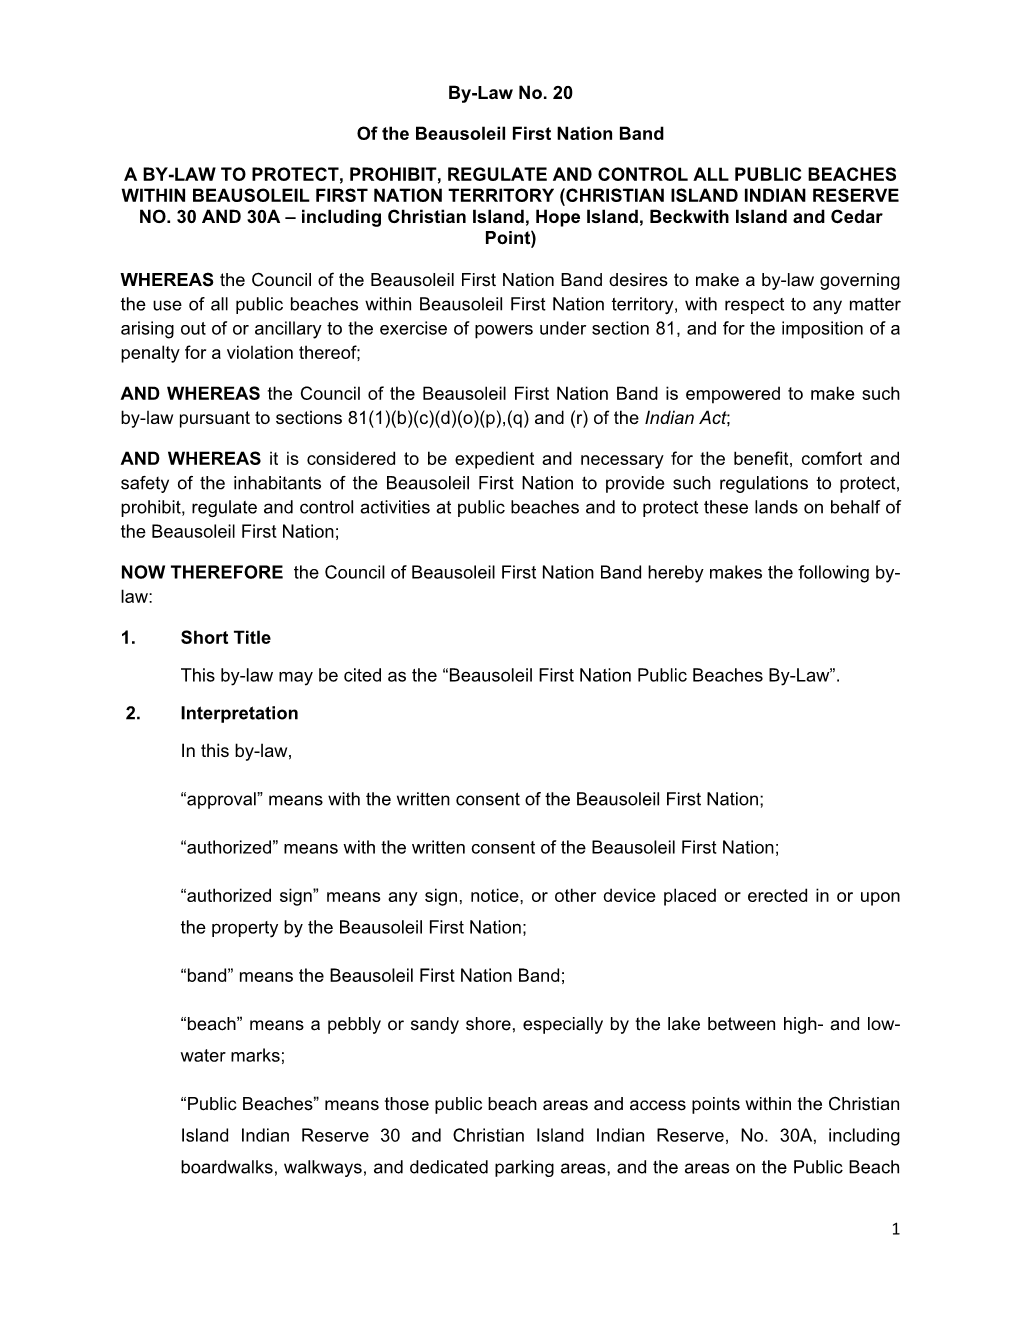 1 By-Law No. 20 of the Beausoleil First Nation Band a BY-LAW TO